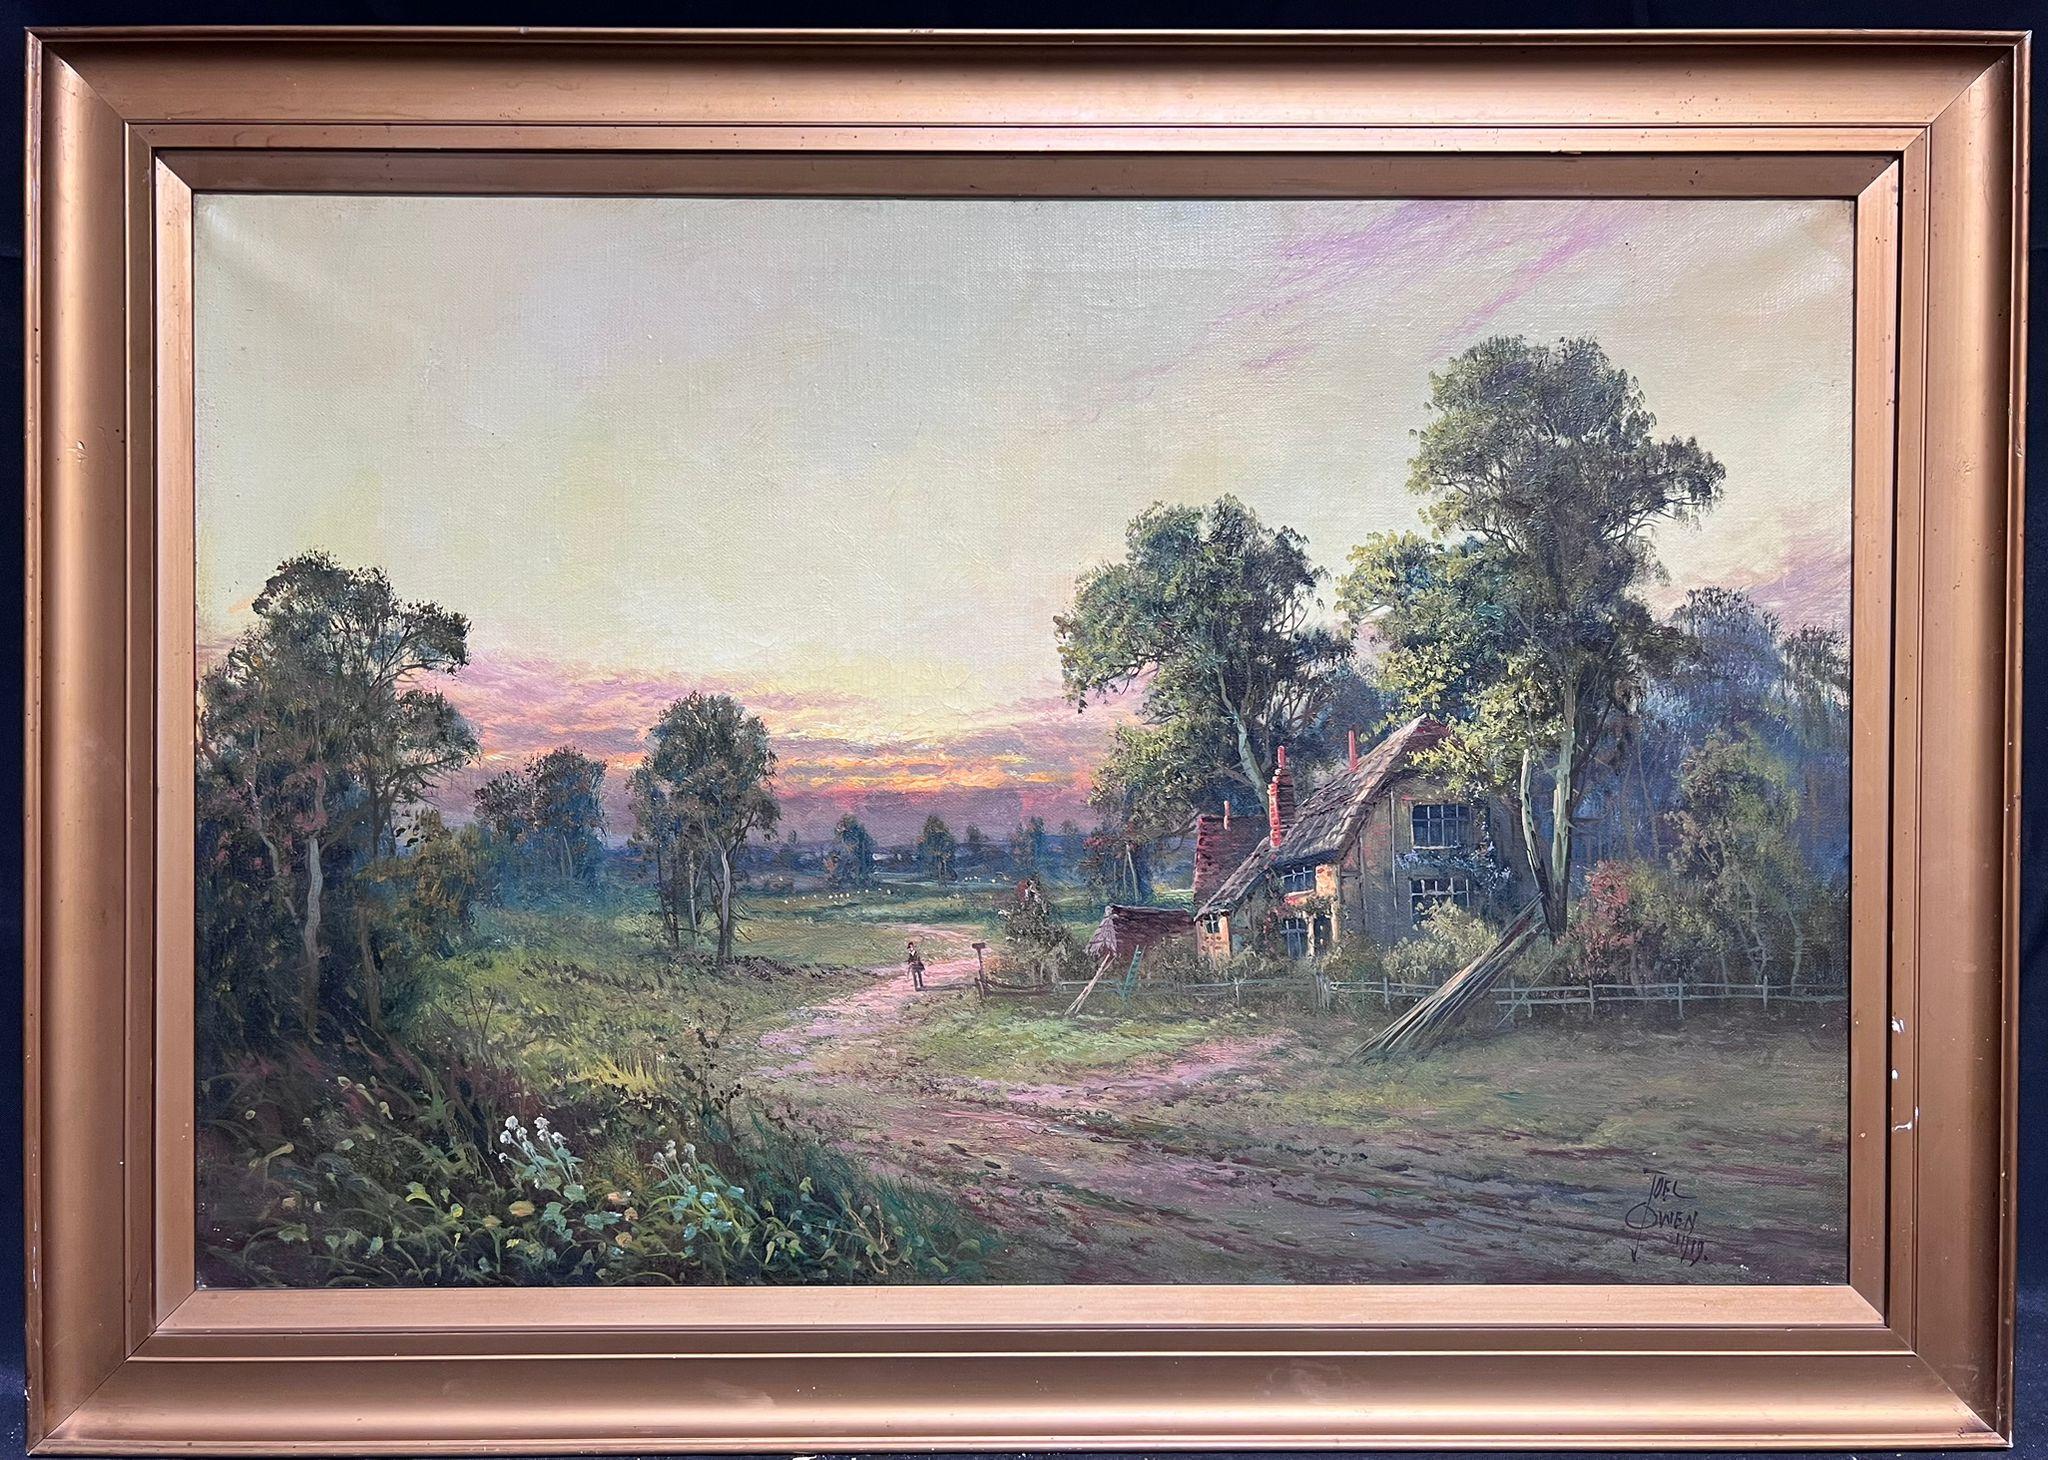 The Close of Day, nr. Dorking, Surrey
by Joel Owen (British, signed and dated 1919)
oil on canvas, framed
framed: 25 x 35 inches
canvas: 20 x 30 inches
provenance: private collection, UK
condition: very good and sound condition, slight indent to